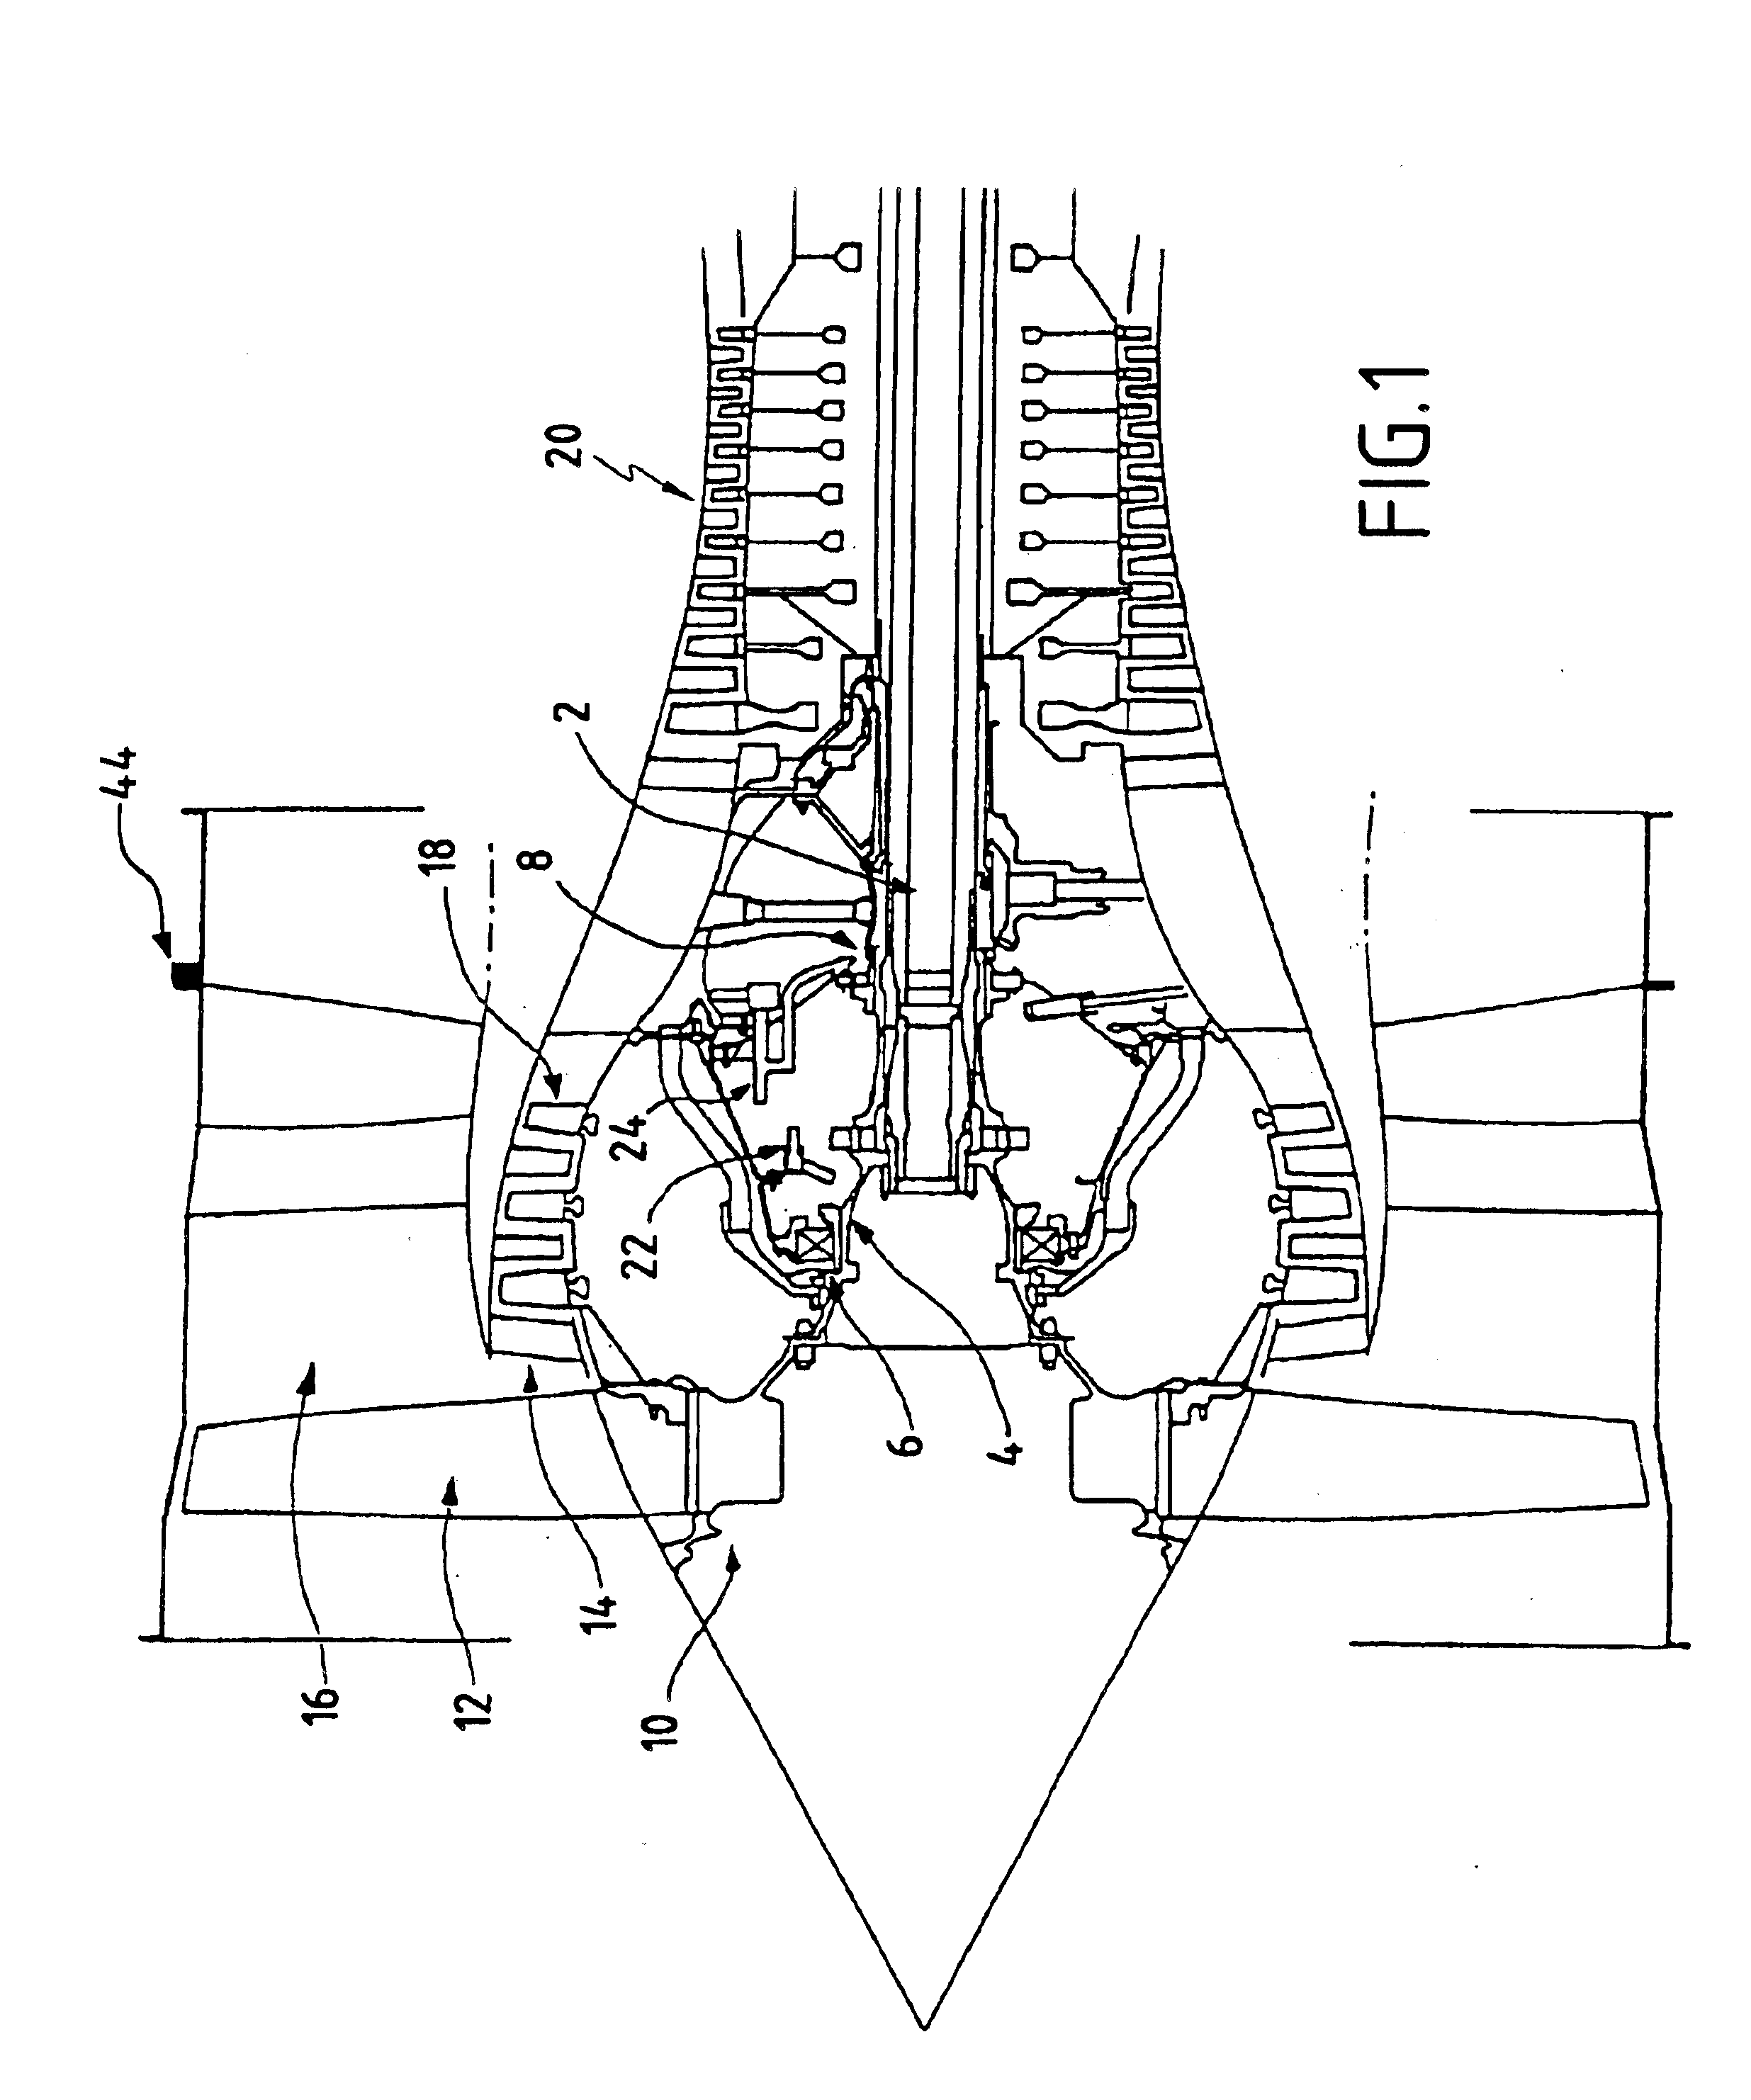 System for decoupling a fan from a turbojet by means of an explosive charge